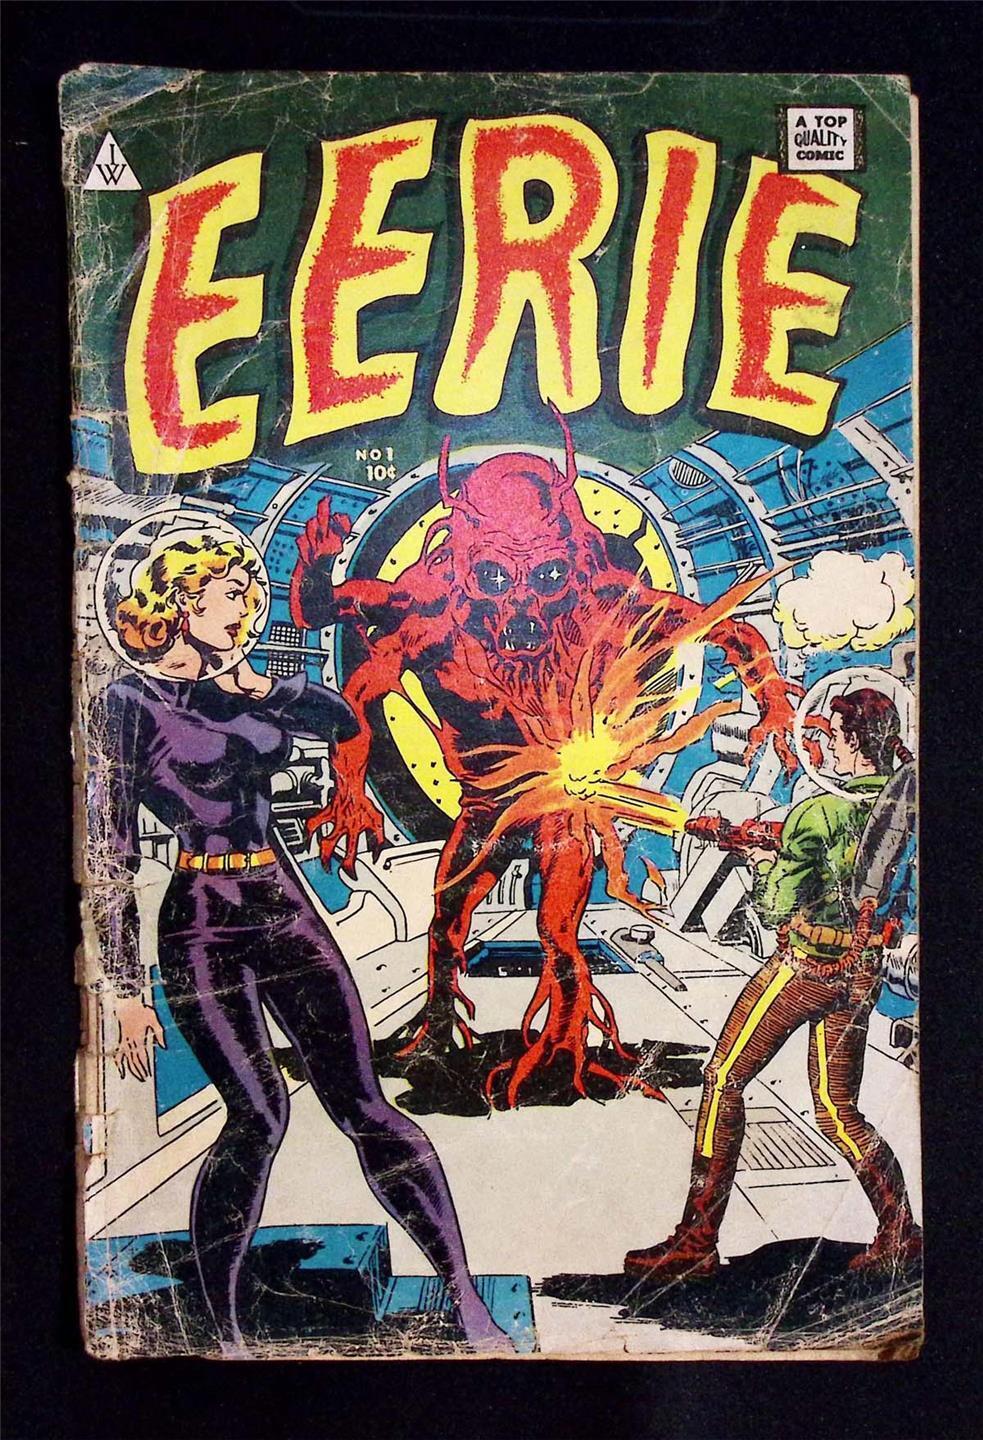 Eerie #1 Wally Wood Art First Issue Sci-Fi Horror Vintage IW 1964 Mister Lucifer